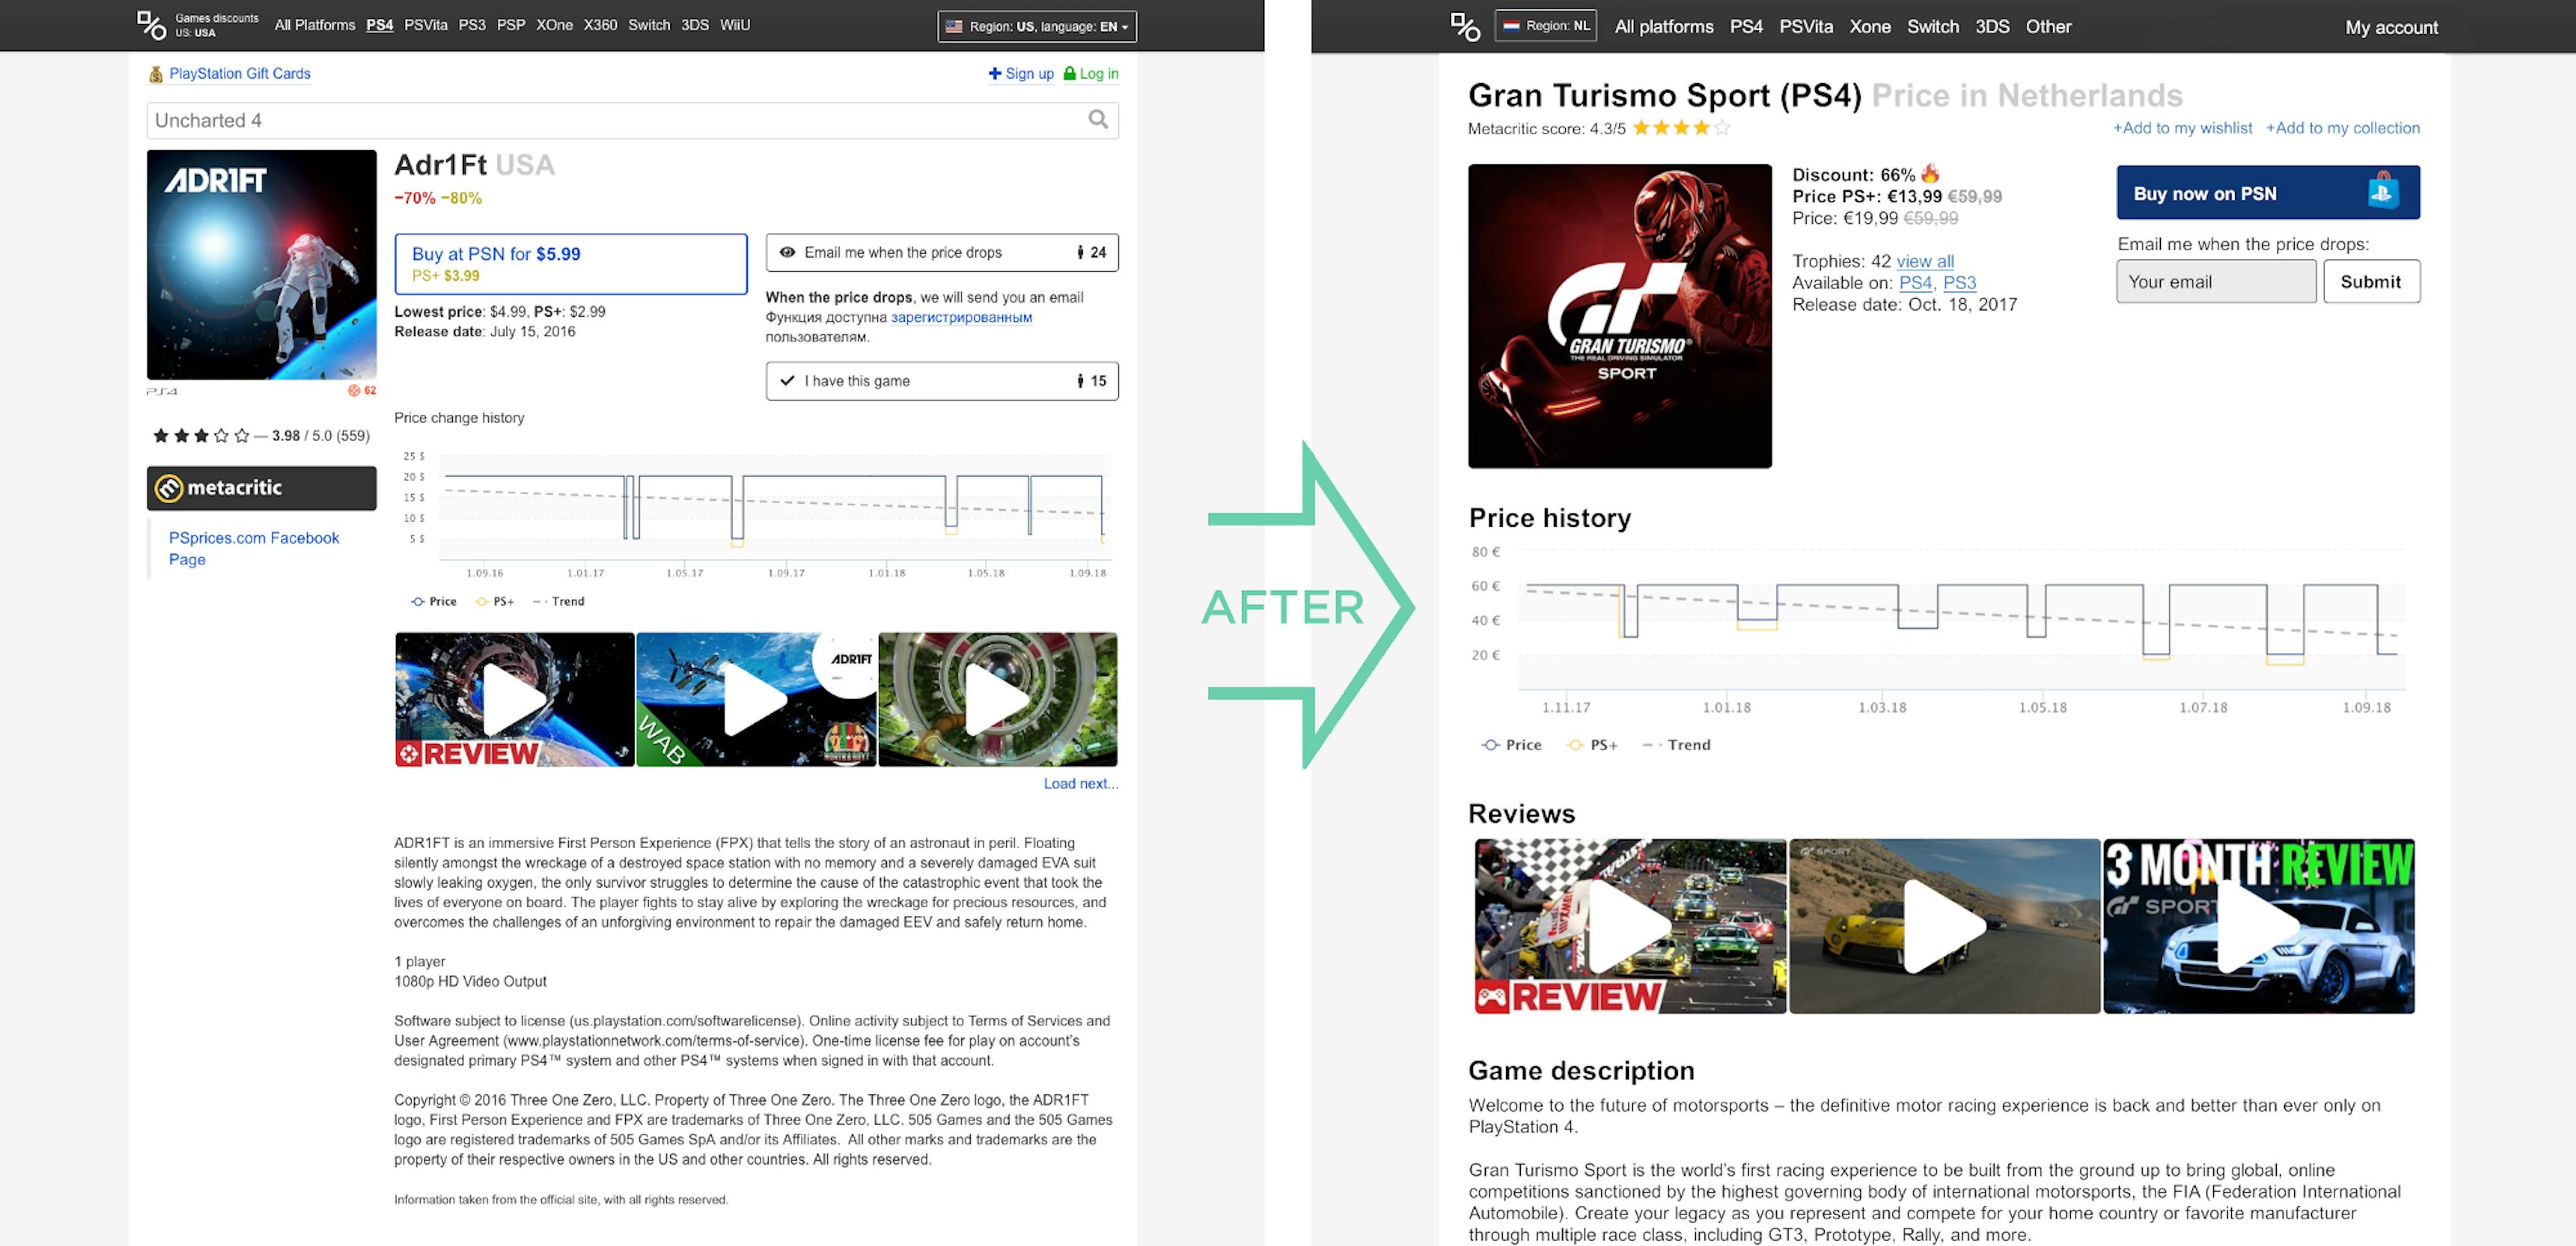 featured image - Improving the UX of PSprices.com: Structure to increase conversion.